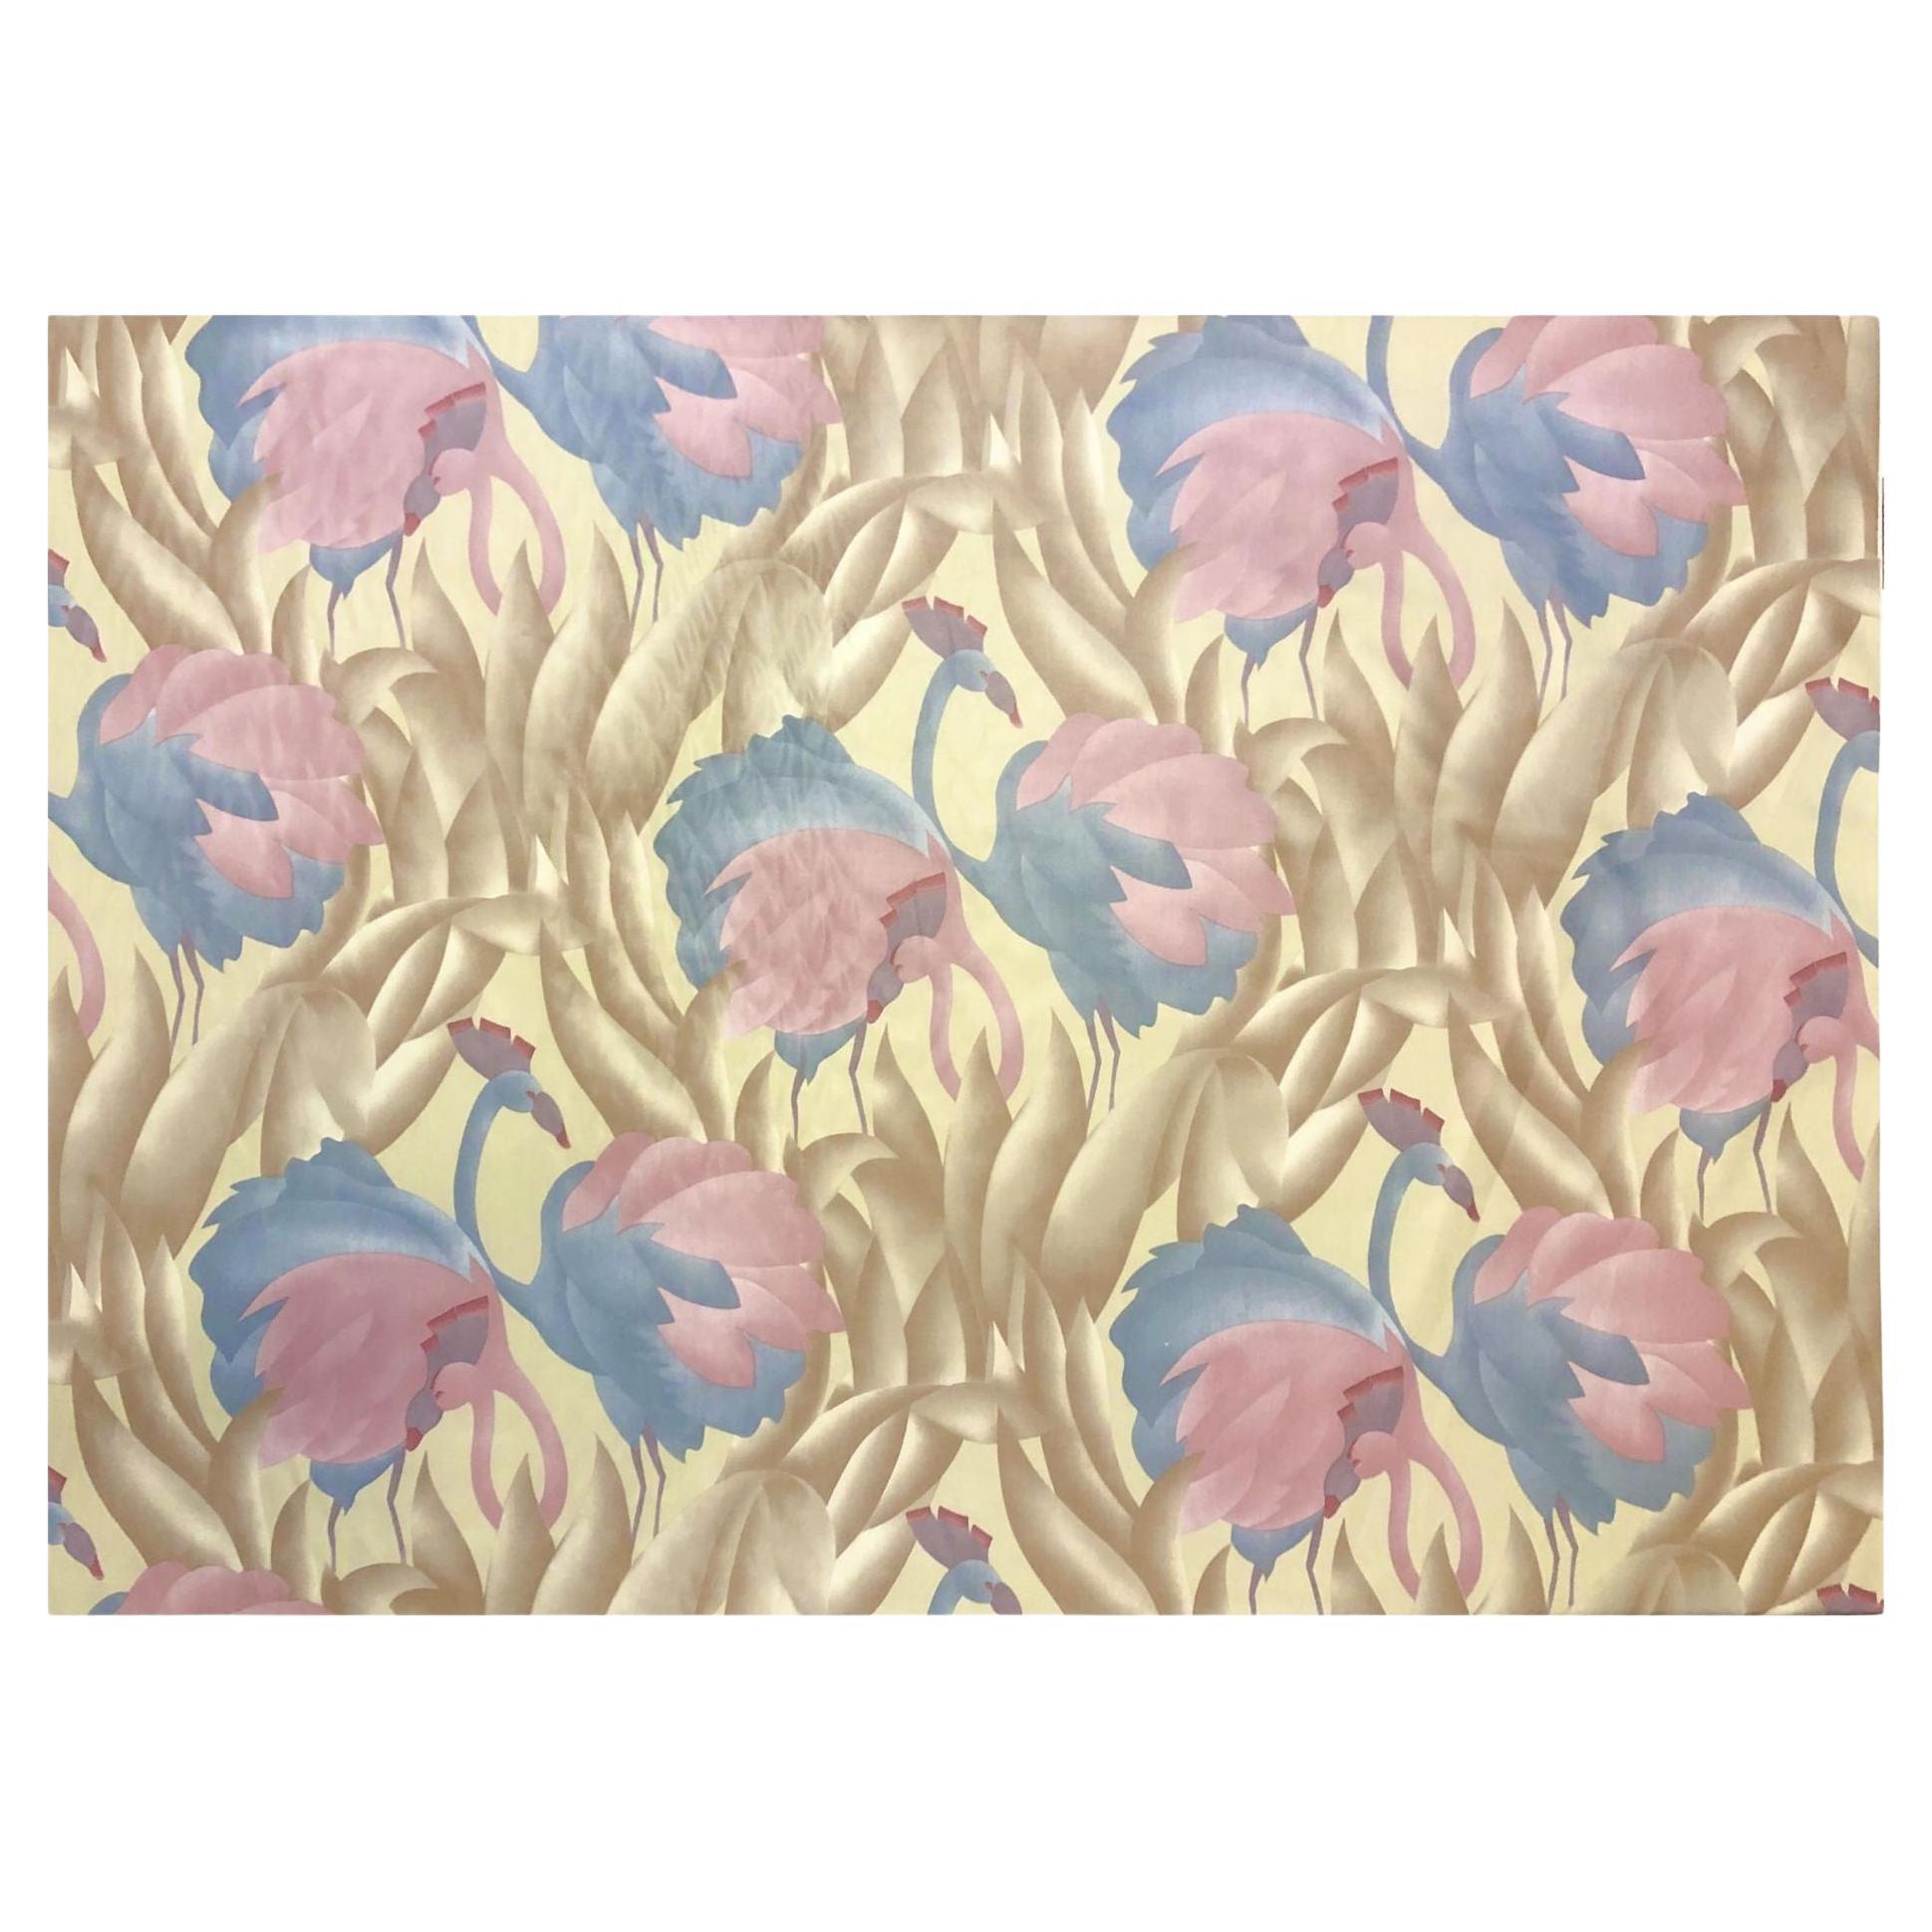 Vintage 1970's Polished Cotton Fabric w/ Tropical Flamingo design, 9 yards total For Sale